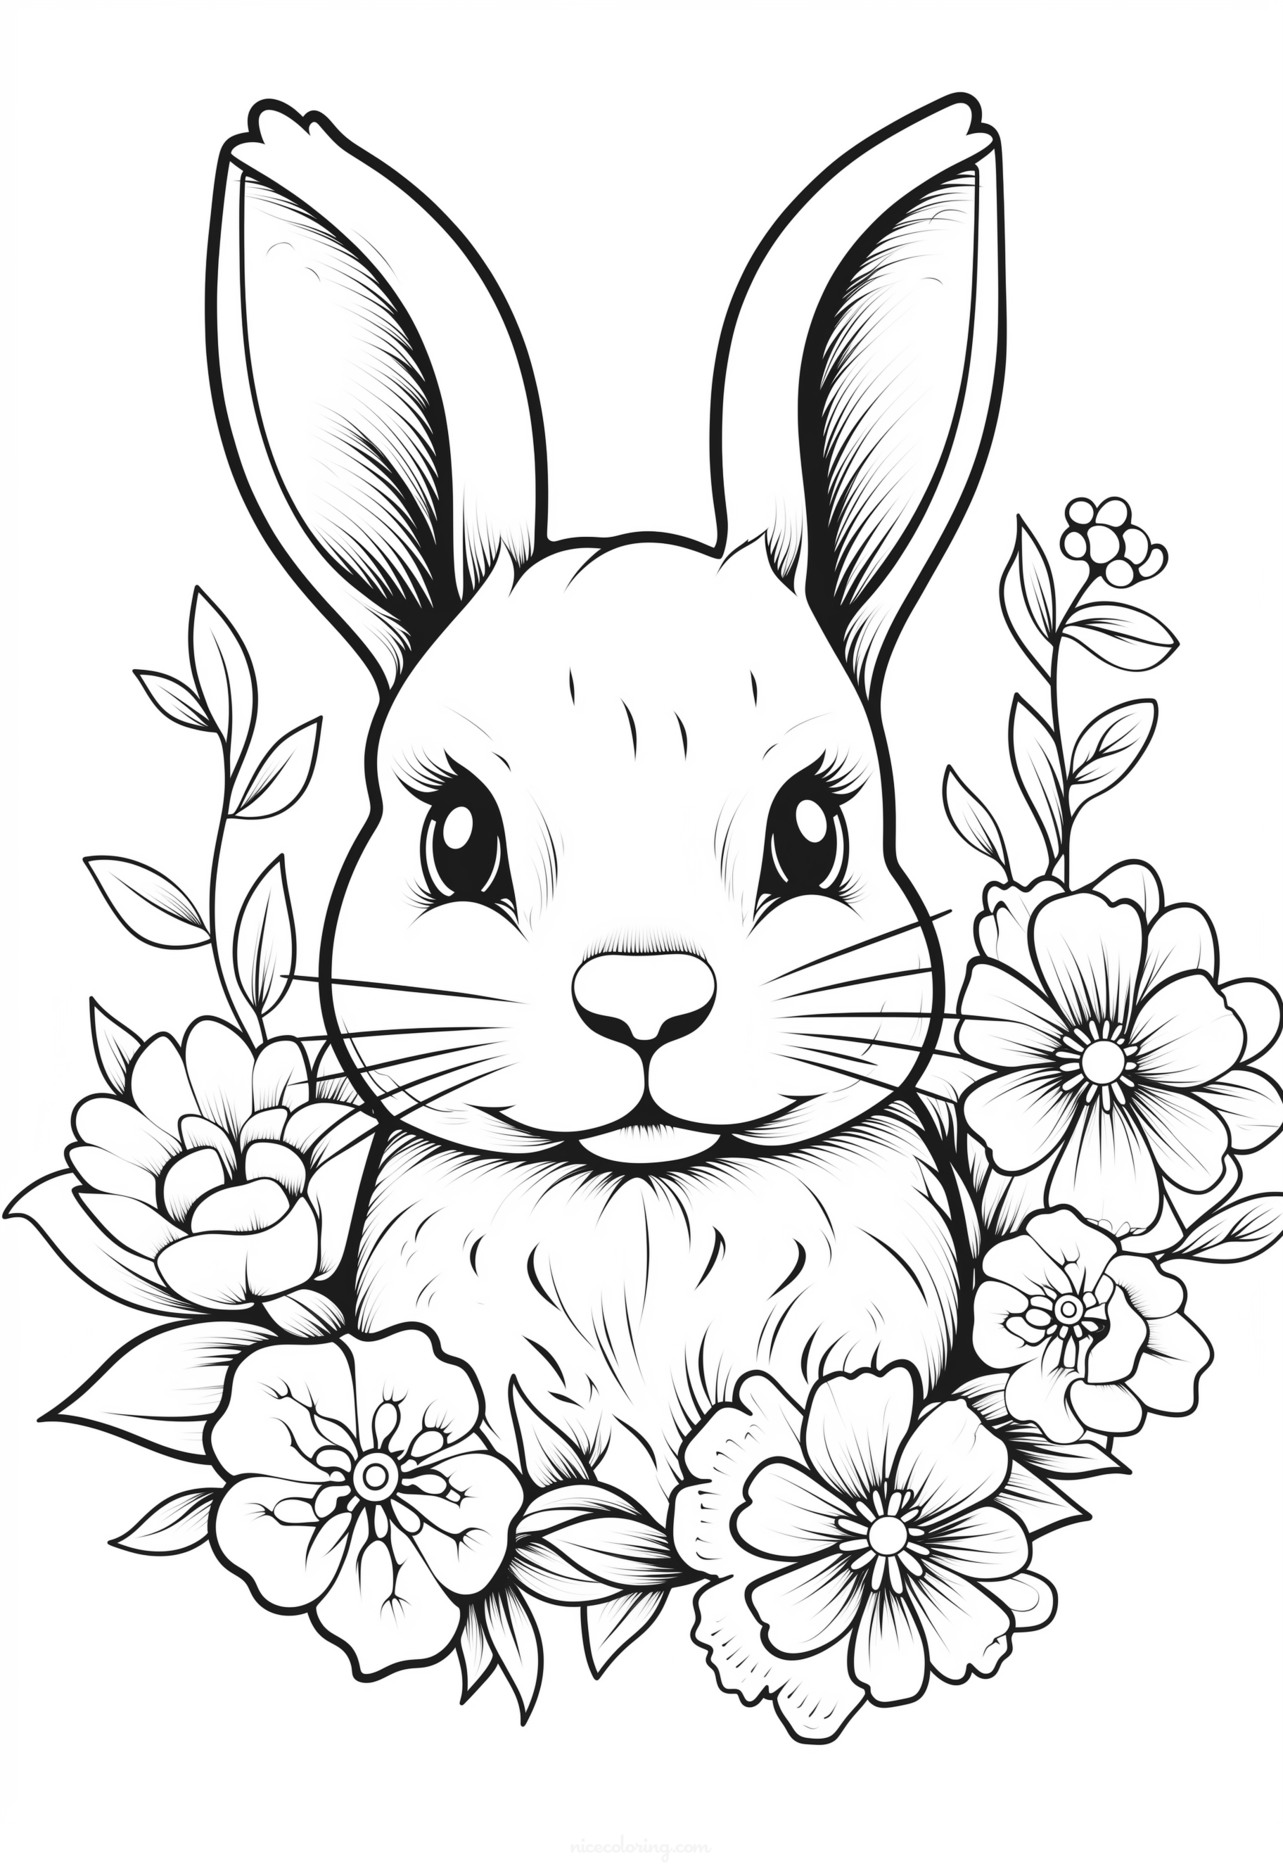 Adorable bunny surrounded by flowers coloring